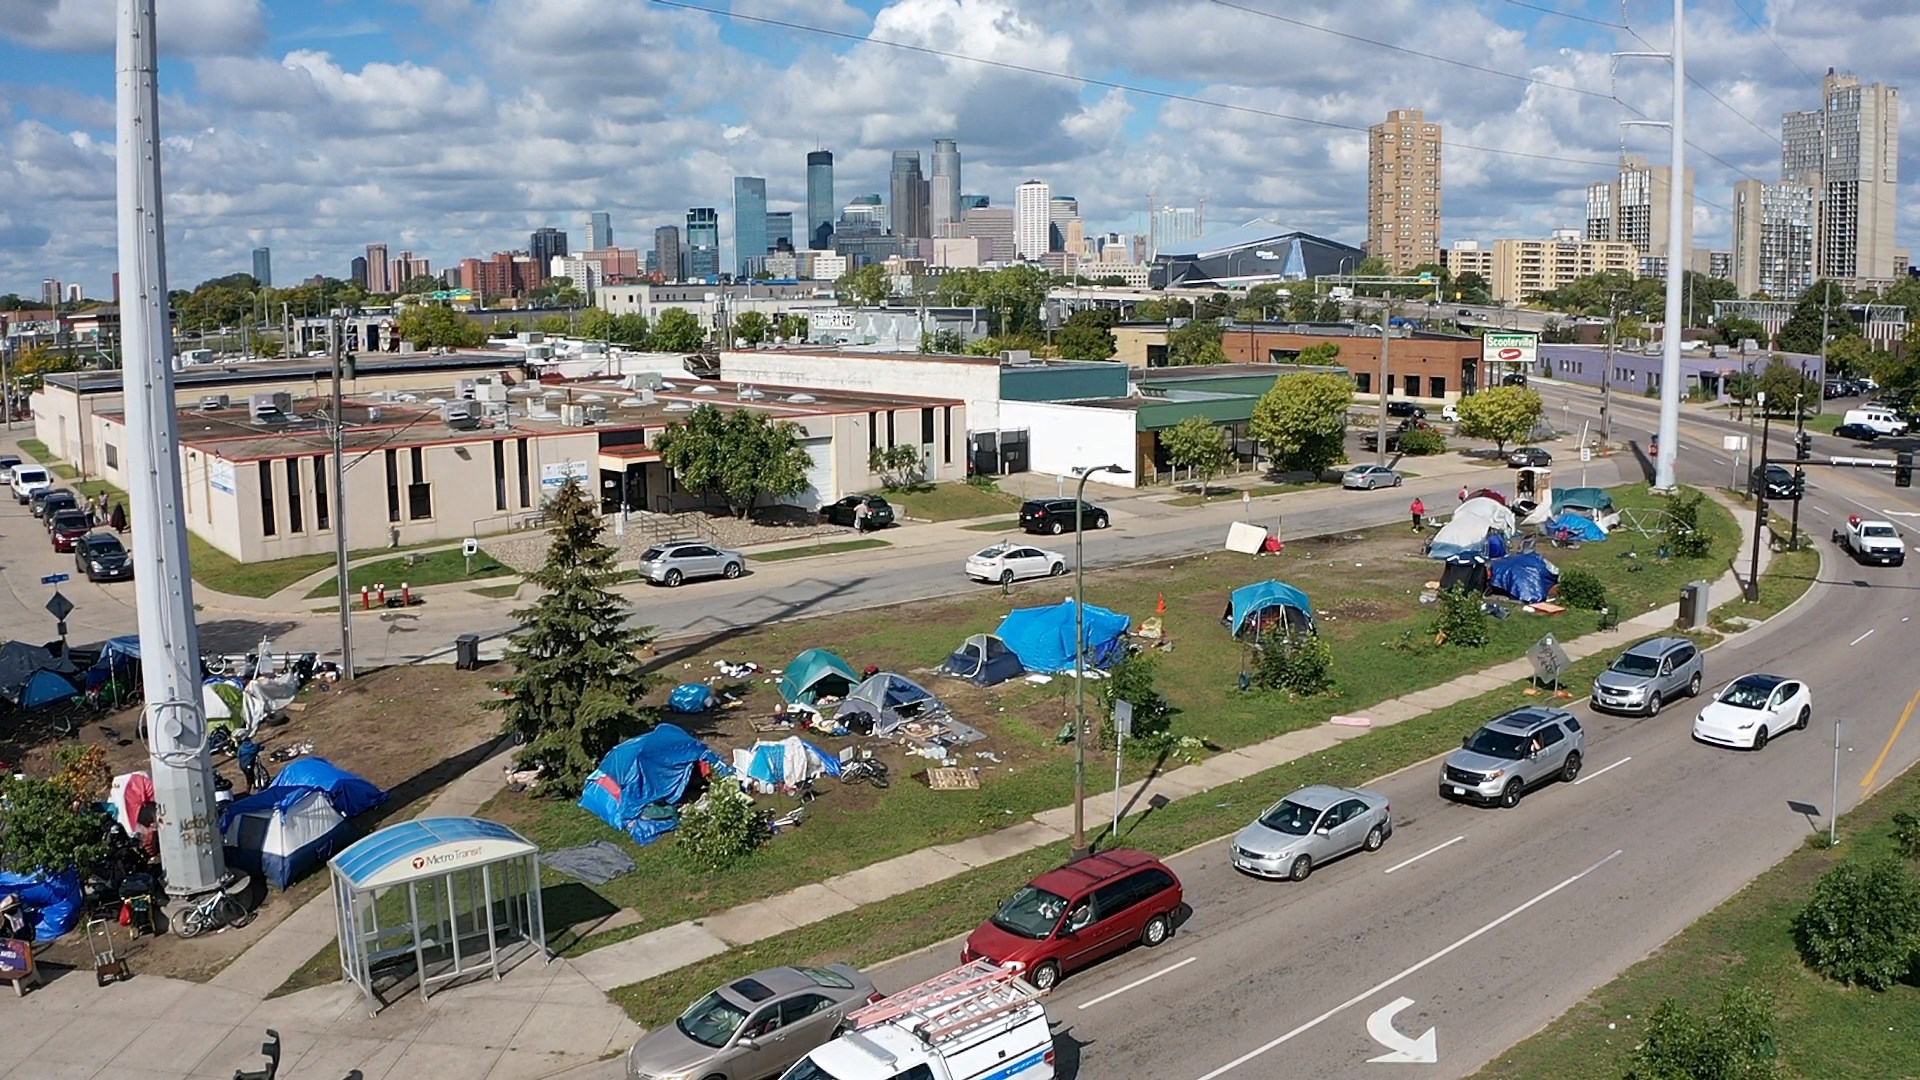 Residents of Tent Encampment in Minneapolis Prepare for Eviction